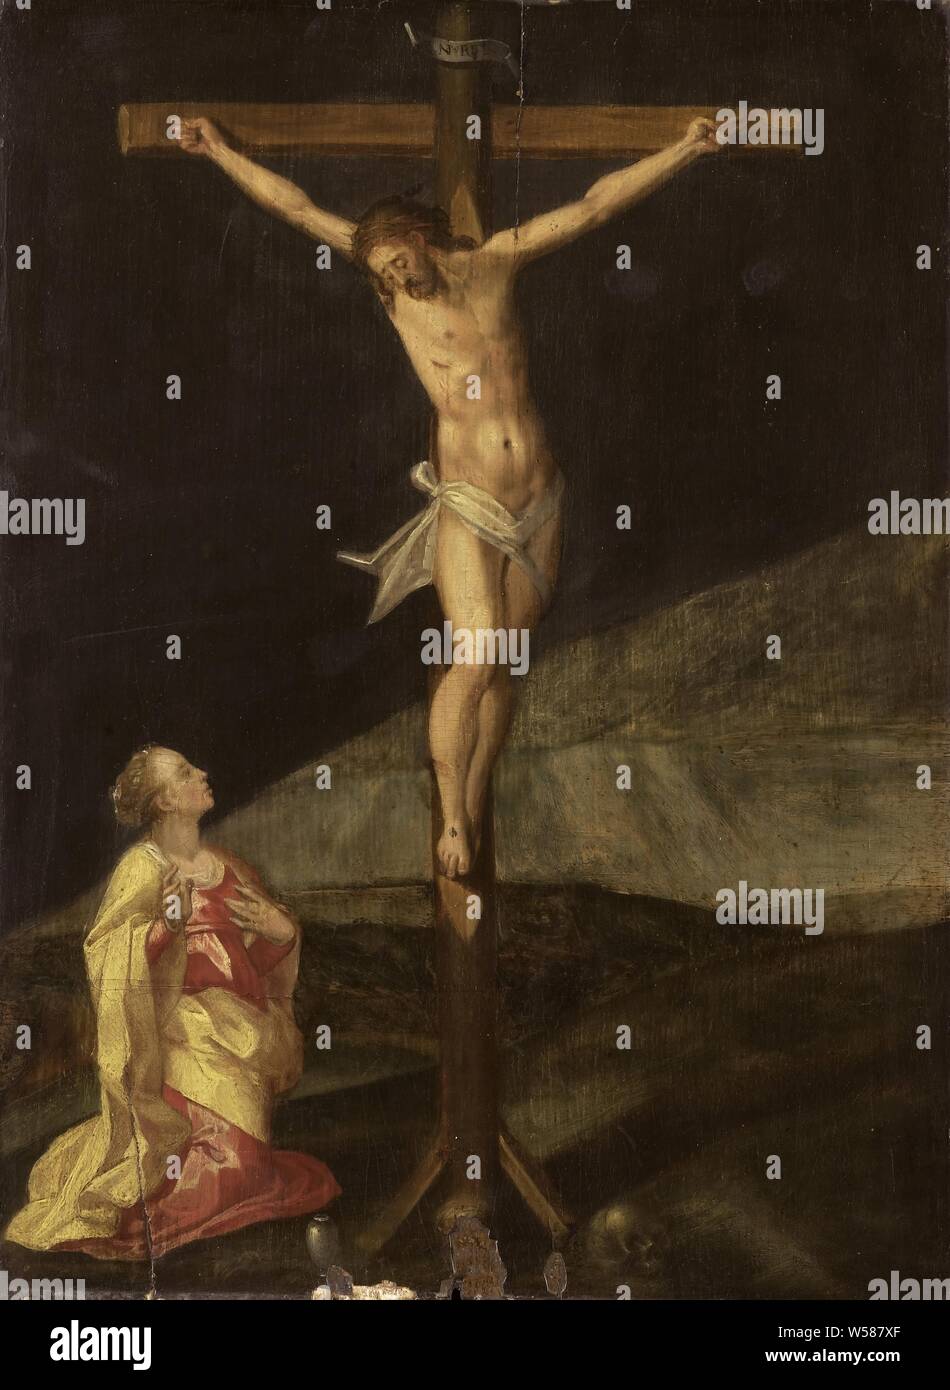 Mary Magdalene at the foot of the cross, Christ on the cross, Mary Magdalene kneeling at the foot of the cross, crucified Christ with Mary Magdalene, who usually weeps and embraces the cross, anonymous, Northern Netherlands, c. 1610, panel, oil paint (paint), support: h 42.7 cm × w 32.7 cm t 0.9 cm d 6.0 cm Stock Photo